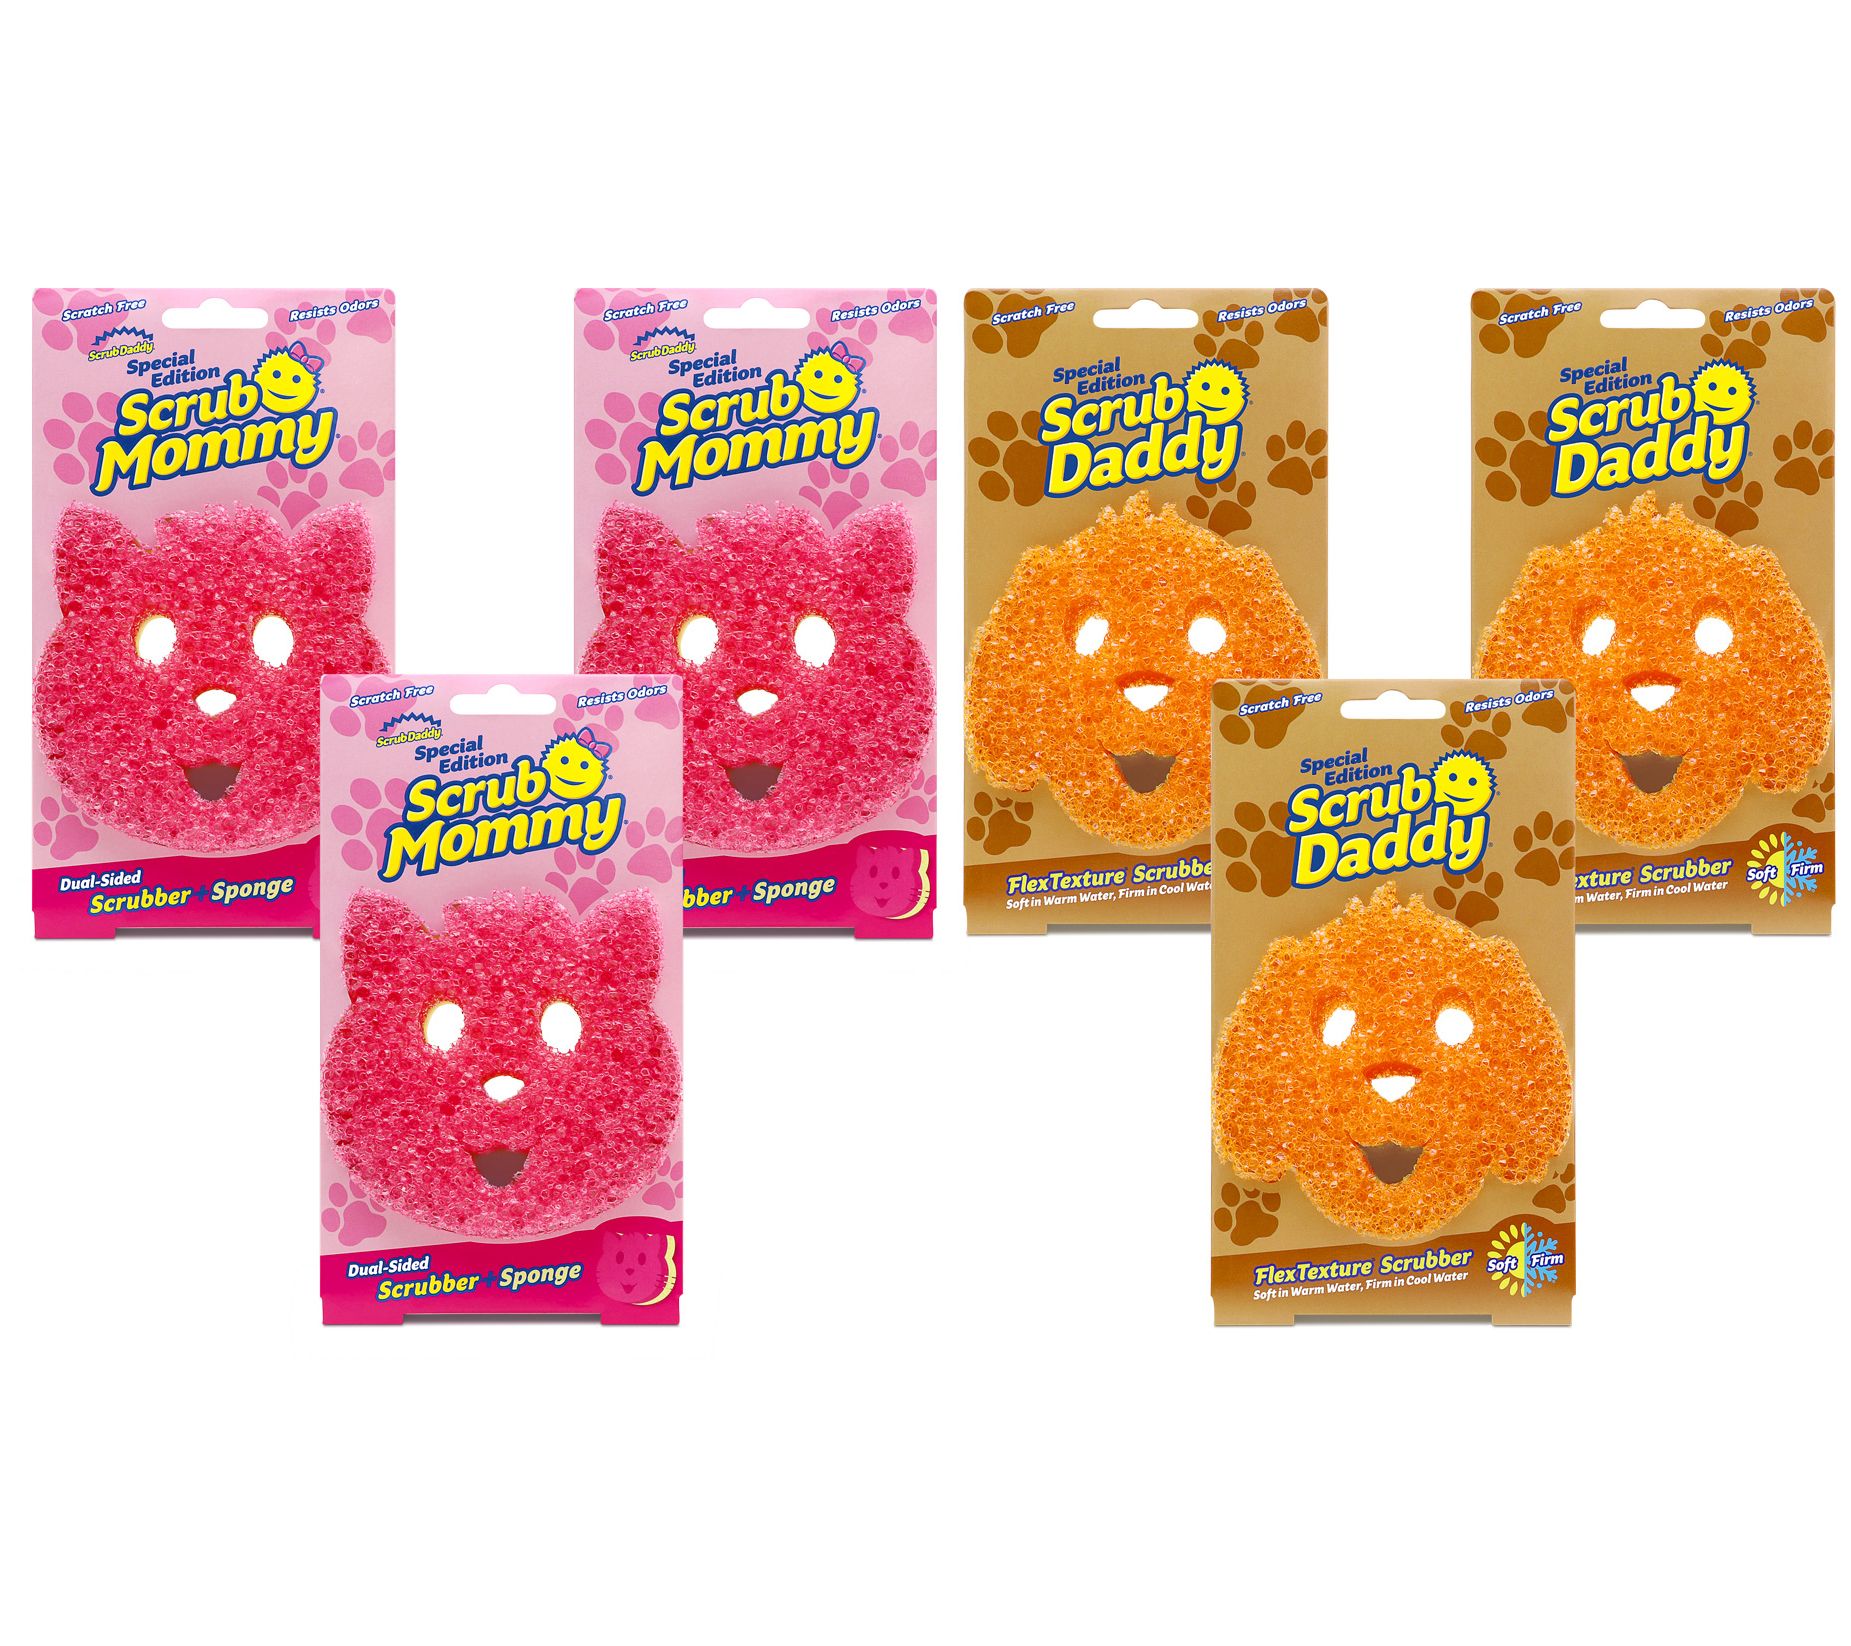 Scrub Daddy UK - We'd love for our Scrub Family to name our new additions!  🐶😻 Comment your pet names for both Cat and Dog and we will narrow it down  for